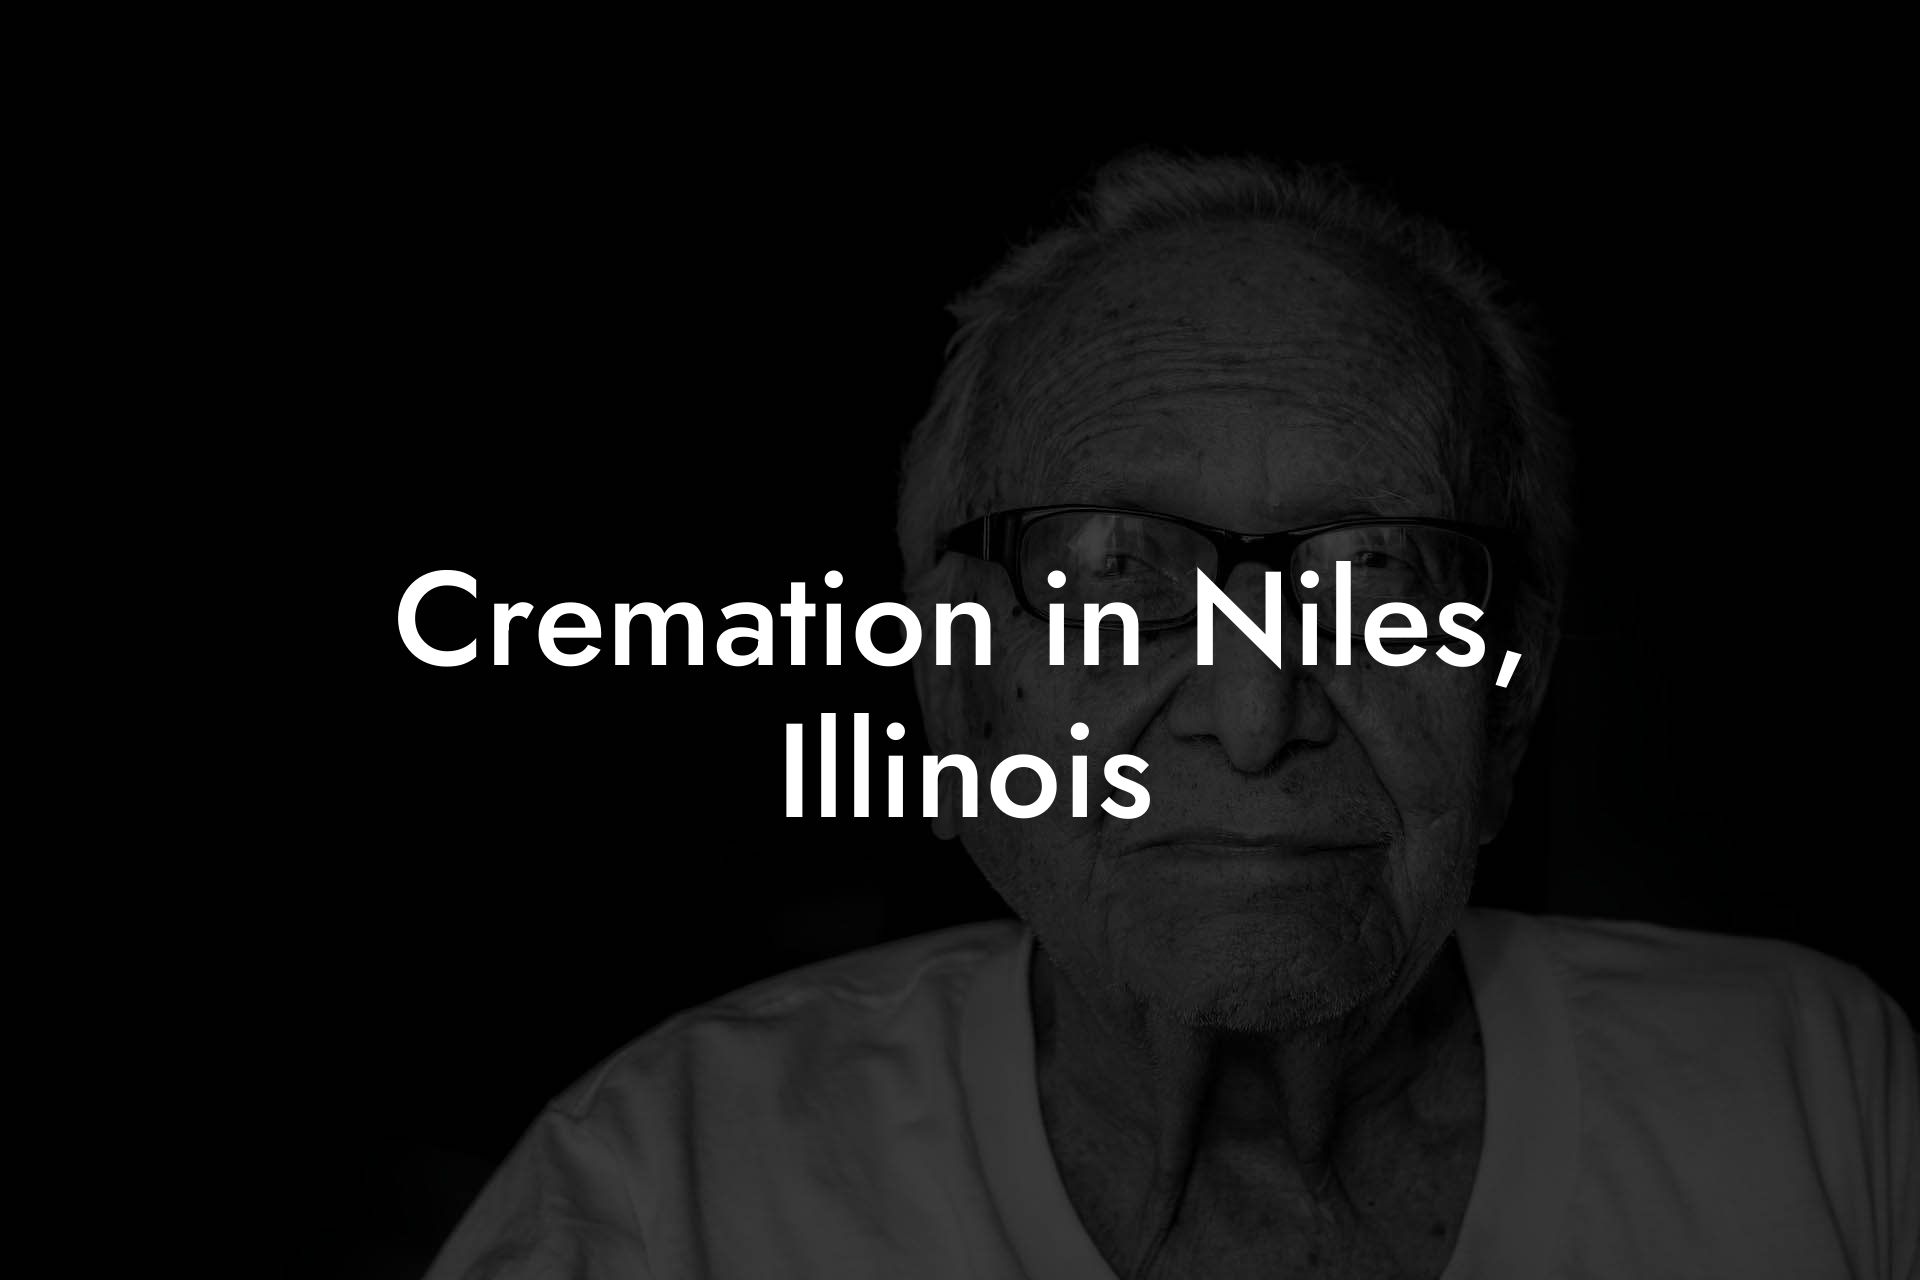 Cremation in Niles, Illinois